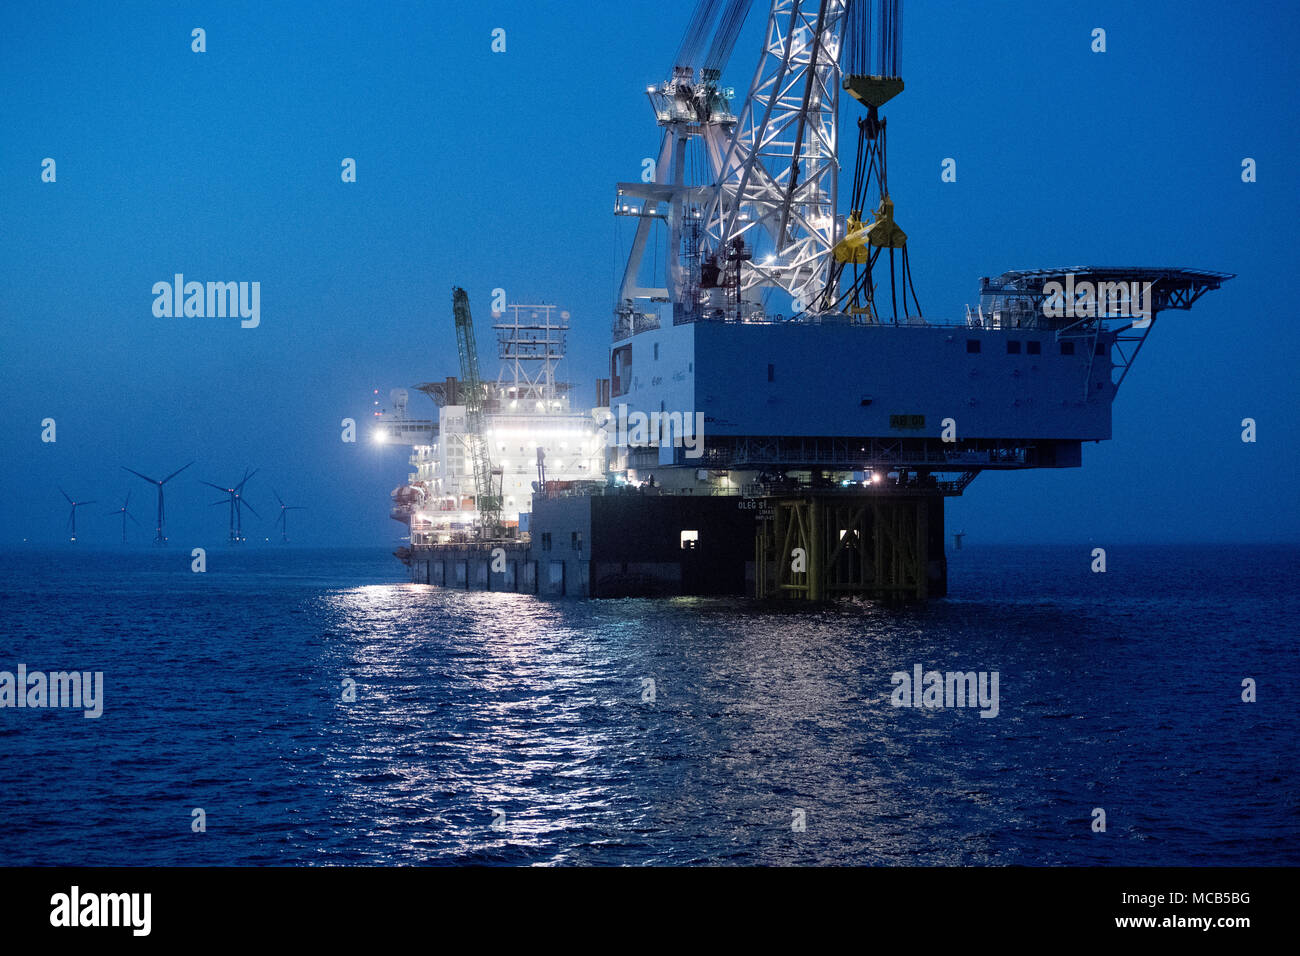 08 April 2018, Germany, Sassnitz: The 4,000 tons weighing transformer platform is being mounted with the help of crane ship 'Oleg Strashnov' at the offshore wind park 'Arkona' near Ruegen Island. Offshore wind park 'Arkona' is expected to be brought online in early 2019 delivering 385 megawatt of energy from 60 wind turbines. Energy company Eon and Norwegian energy company Statoil are investing around 1, 2 billion euro into the project. - NO WIRE SERVICE - Photo: Stefan Sauer/dpa-Zentralbild/dpa Stock Photo